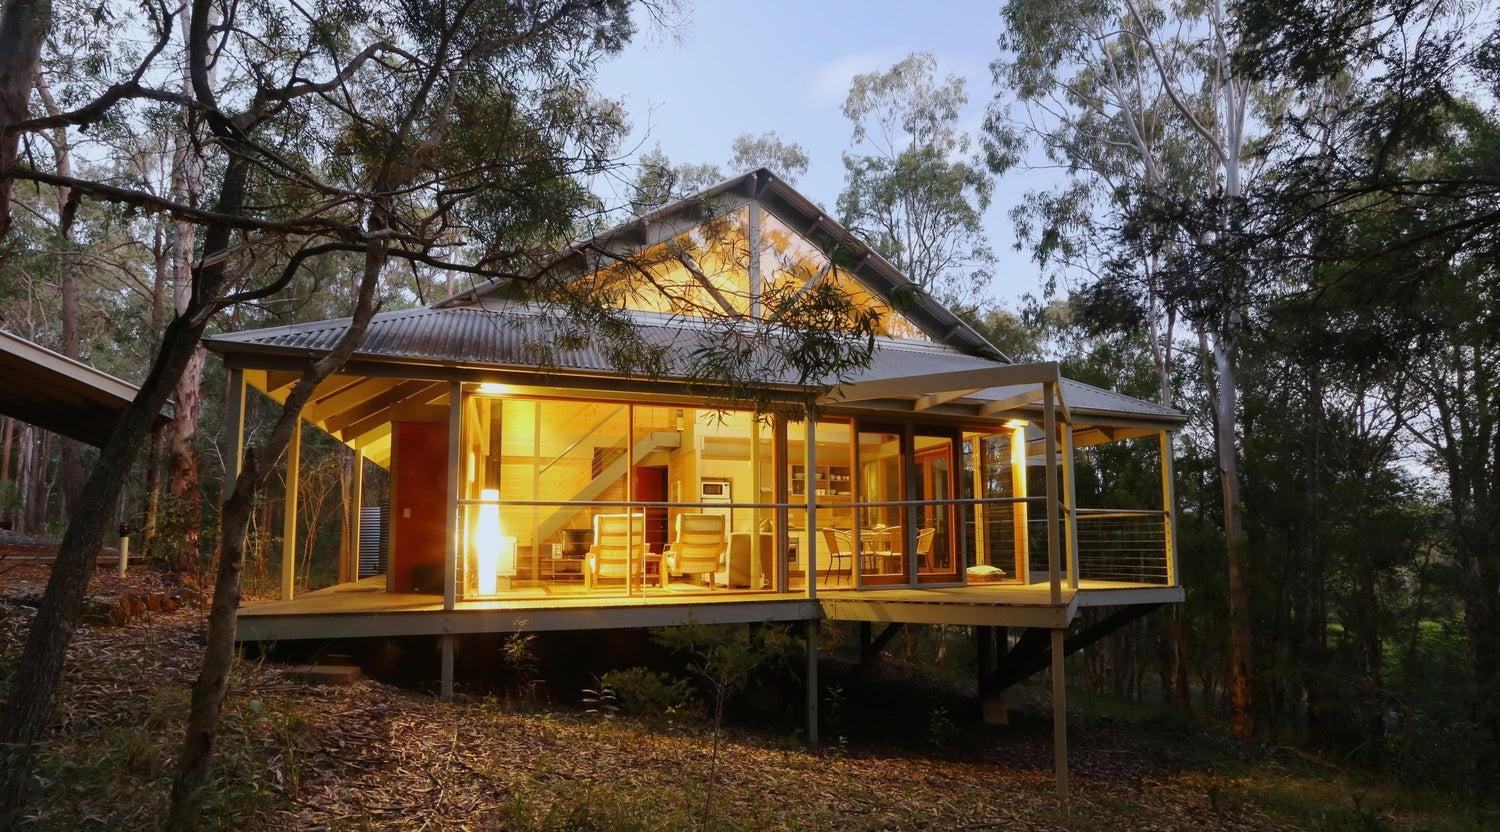 Bombah Point Eco Cottages, Myall Lakes National Park